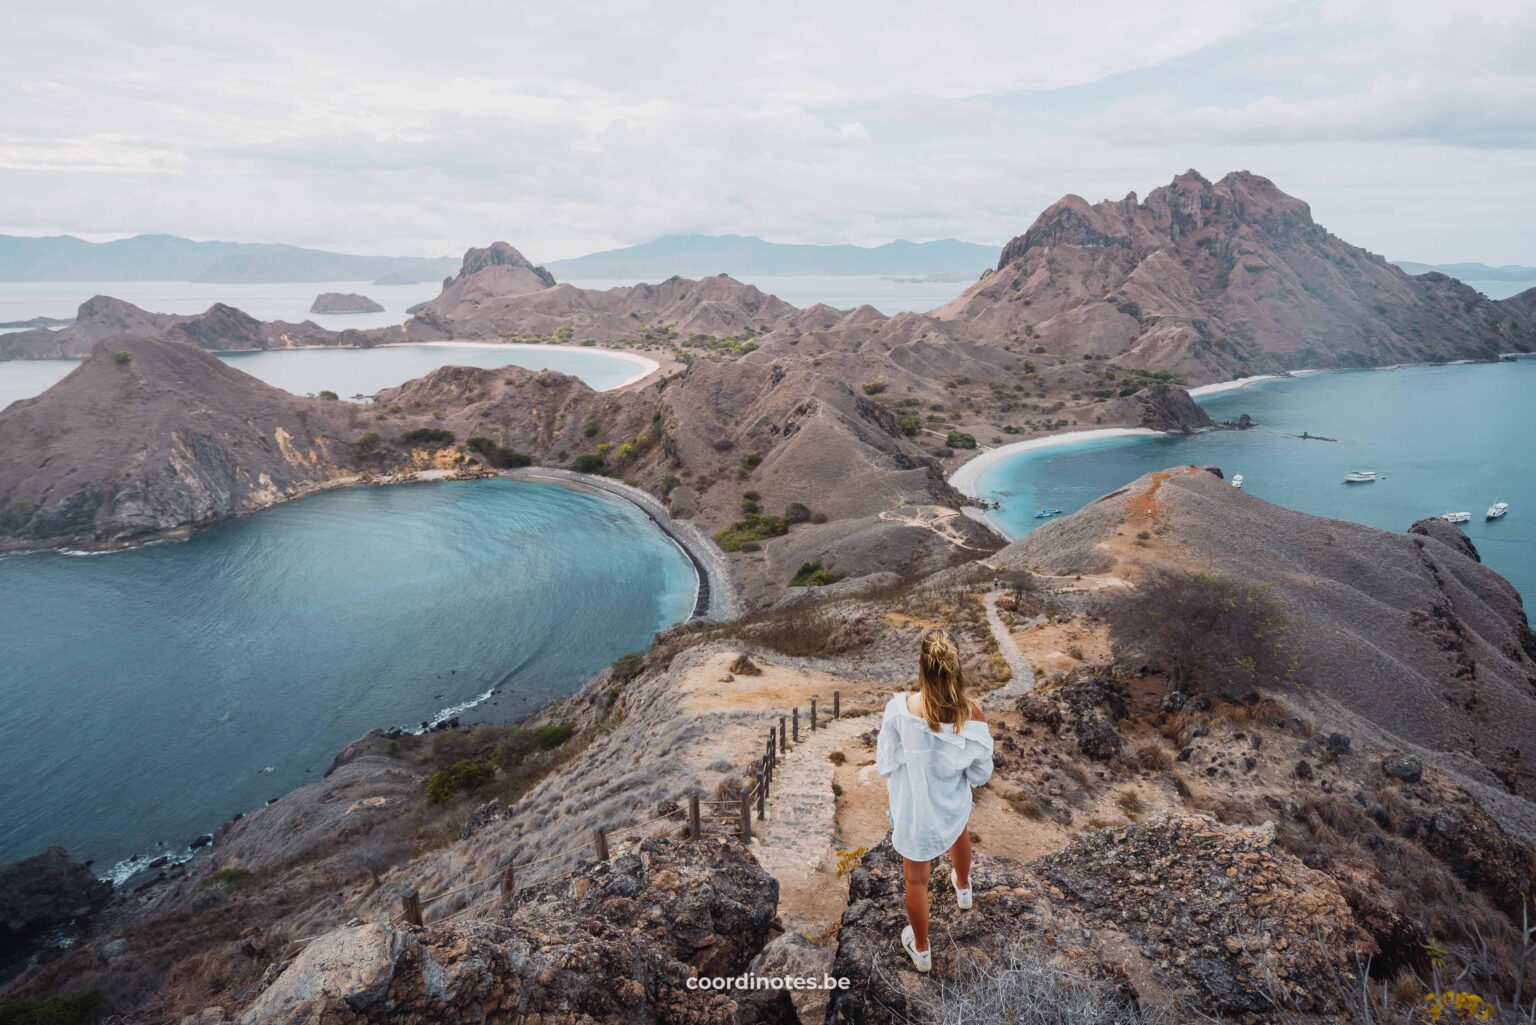 One of the best things to do in Komodo is hiking to the top of Padar Island